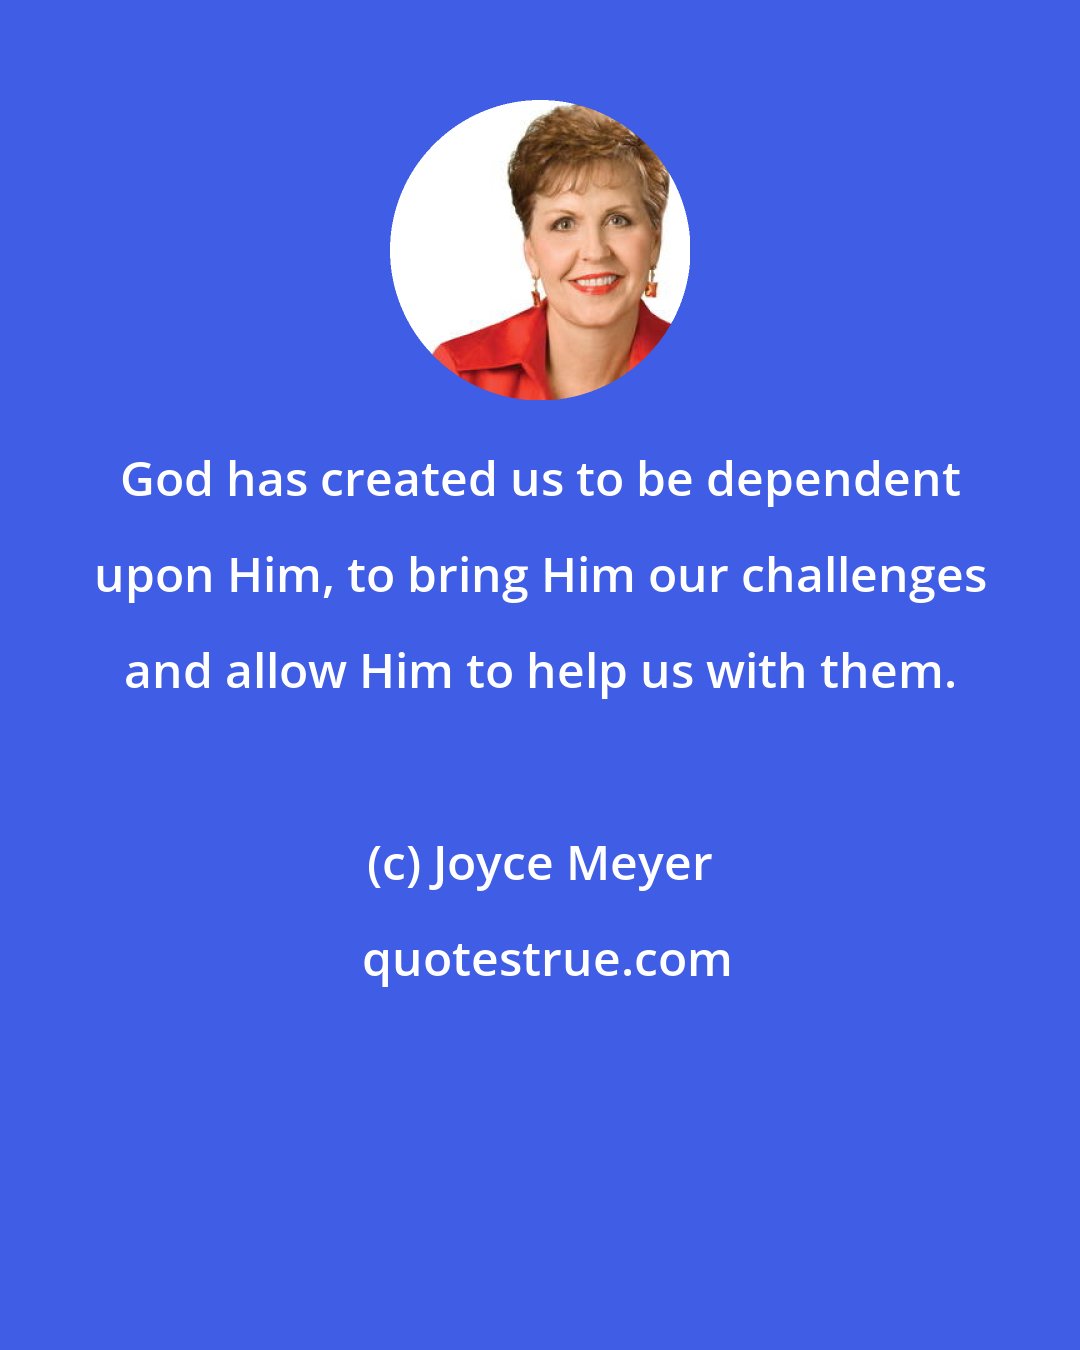 Joyce Meyer: God has created us to be dependent upon Him, to bring Him our challenges and allow Him to help us with them.